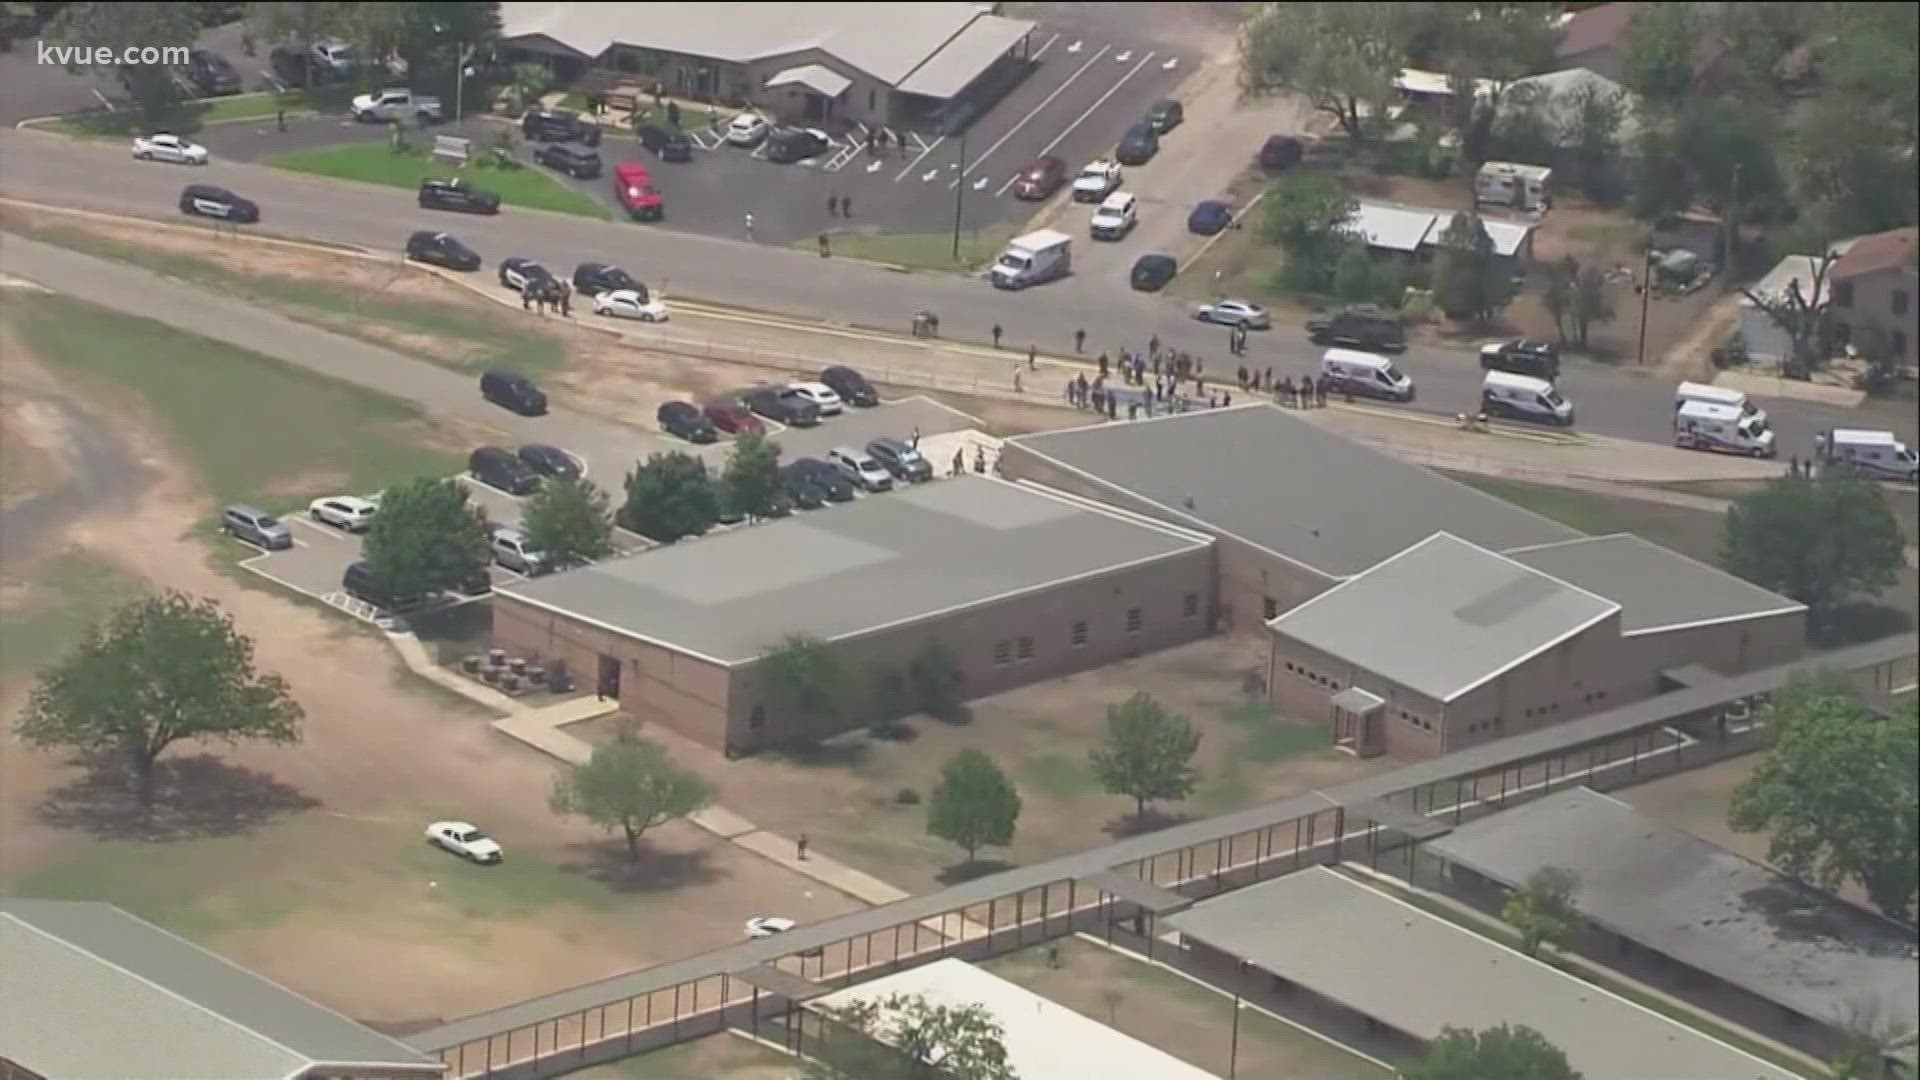 Twenty-one people, including 19 children, at Robb Elementary school were killed in Uvalde. KVUE was live from the community as we learned more.